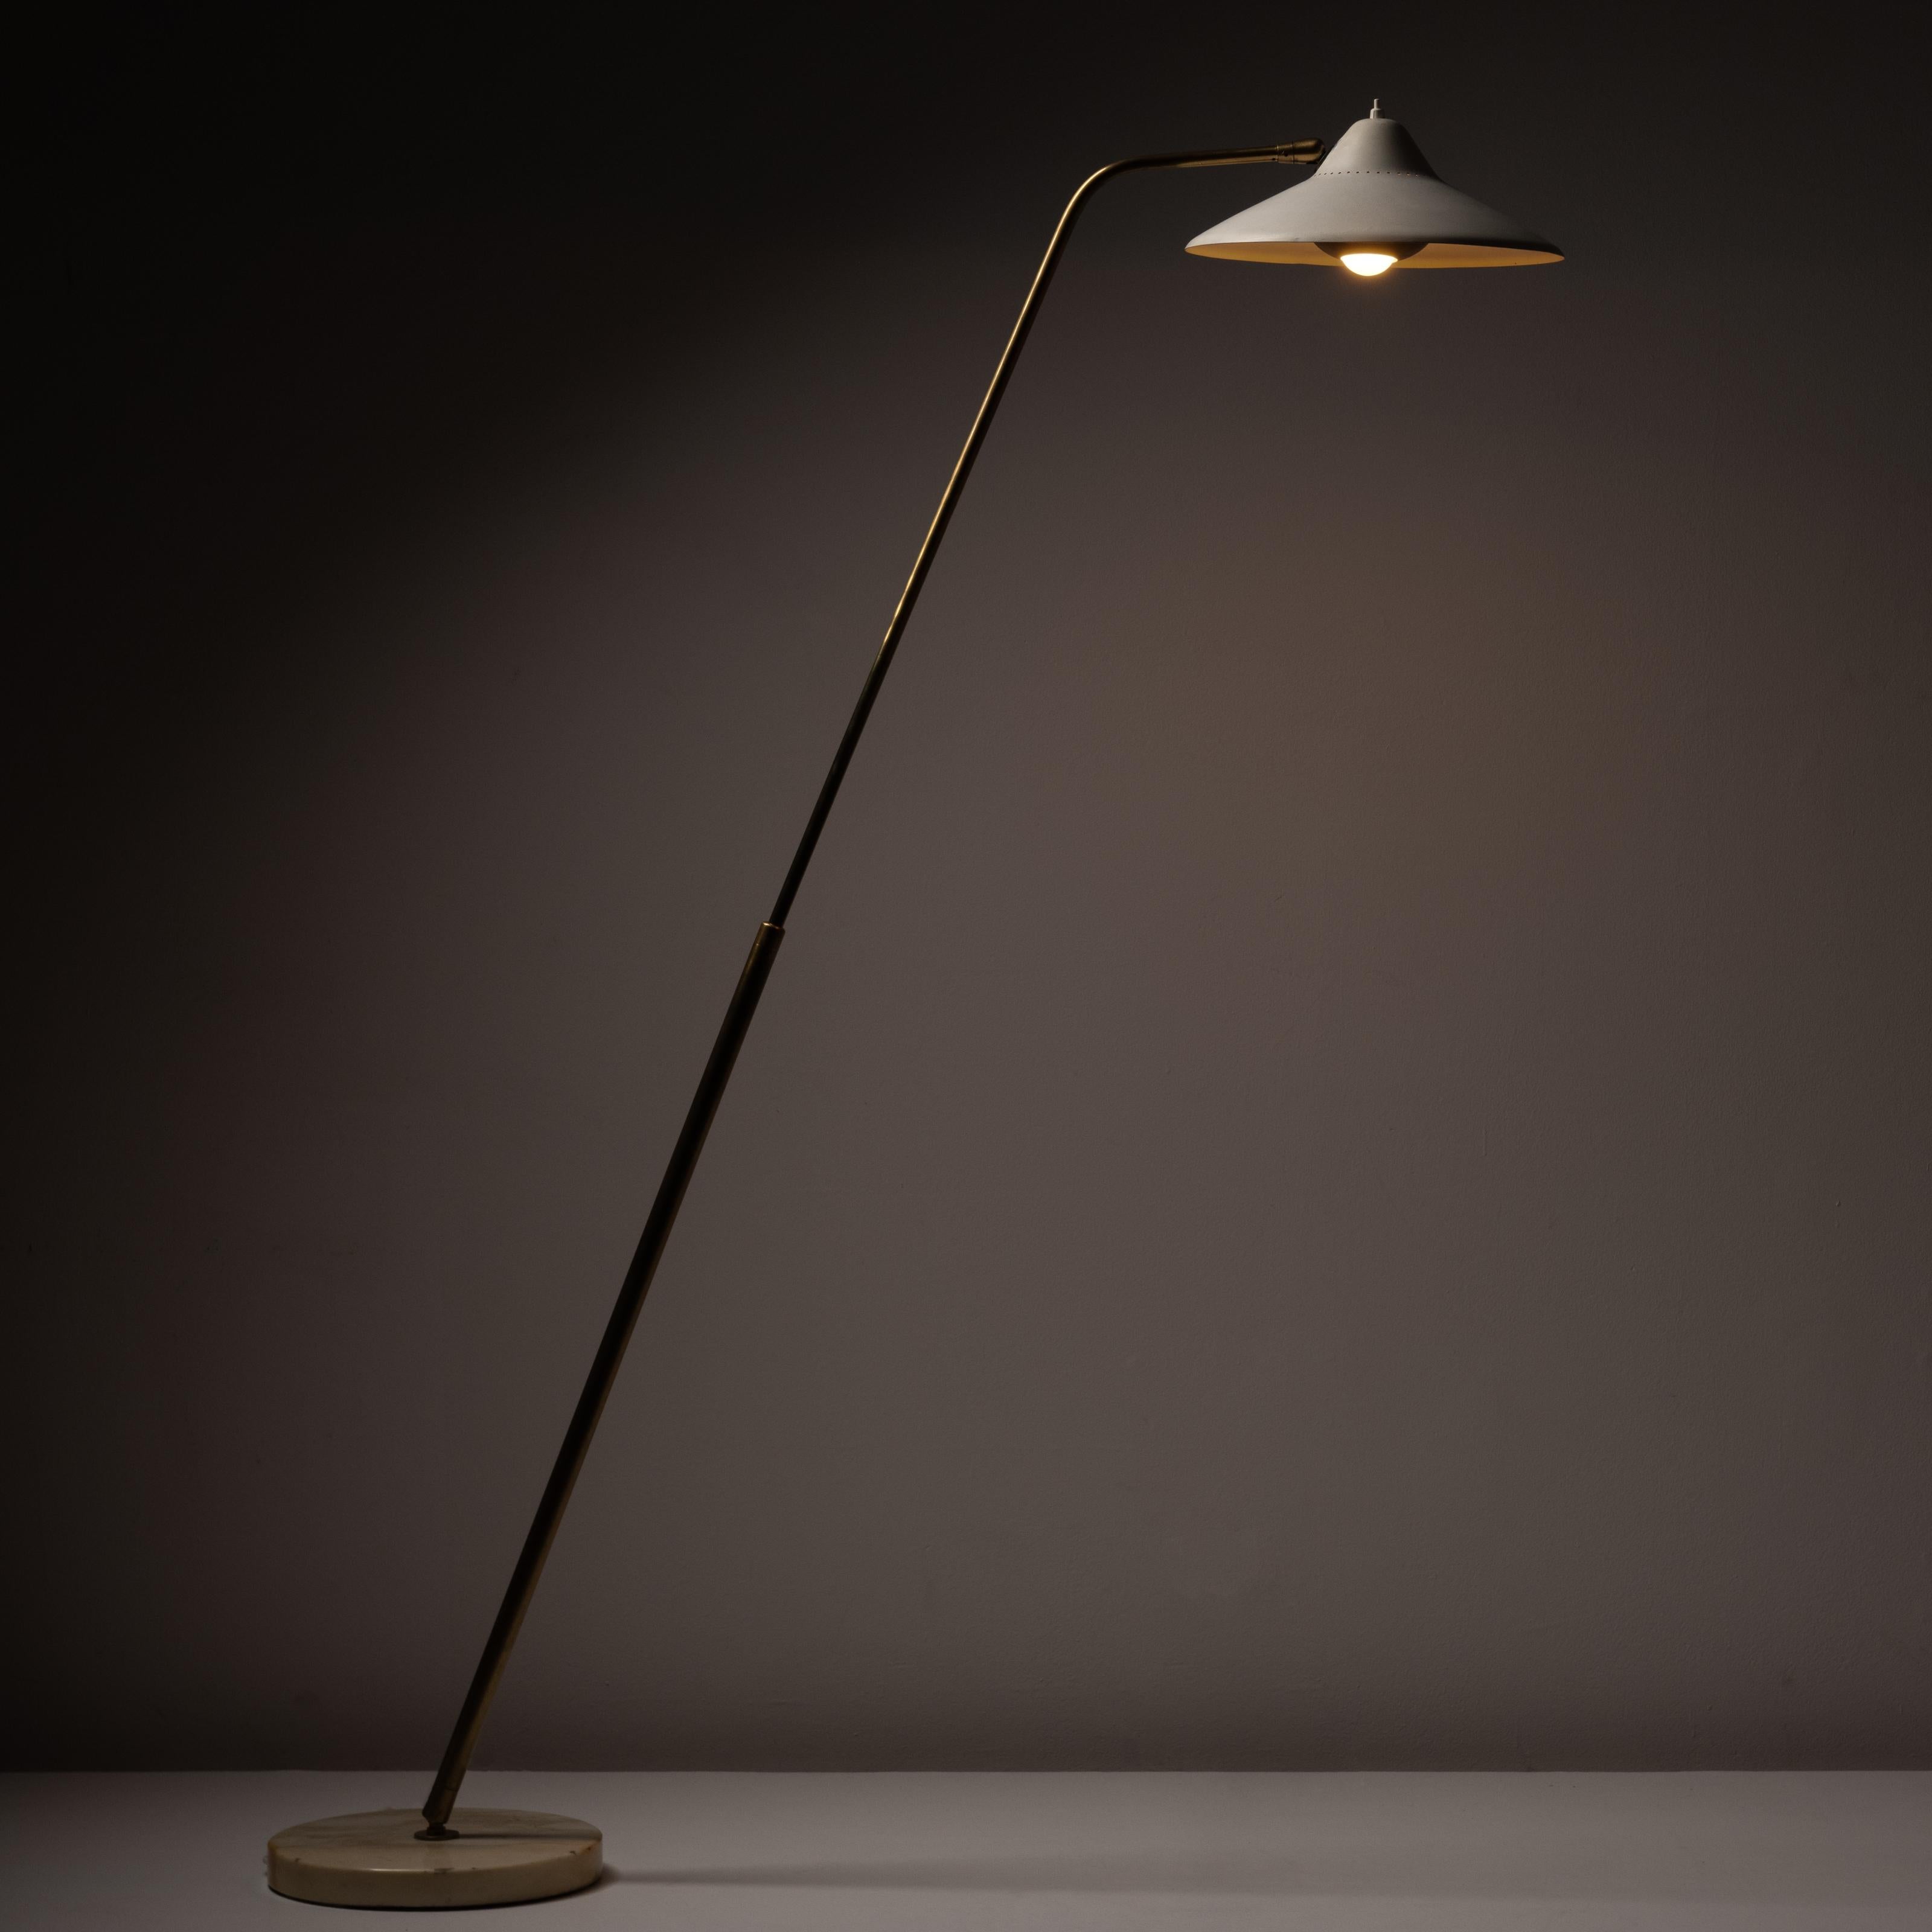 'Model 301C Floor Lamp' by Giuseppe Ostuni for Oluce. Designed and manufactured in Italy, in 1950. Beautiful and rare floor lamp with a sanded marble base with an extractable and anatomic brass stem. The shade is constructed of enameled aluminum